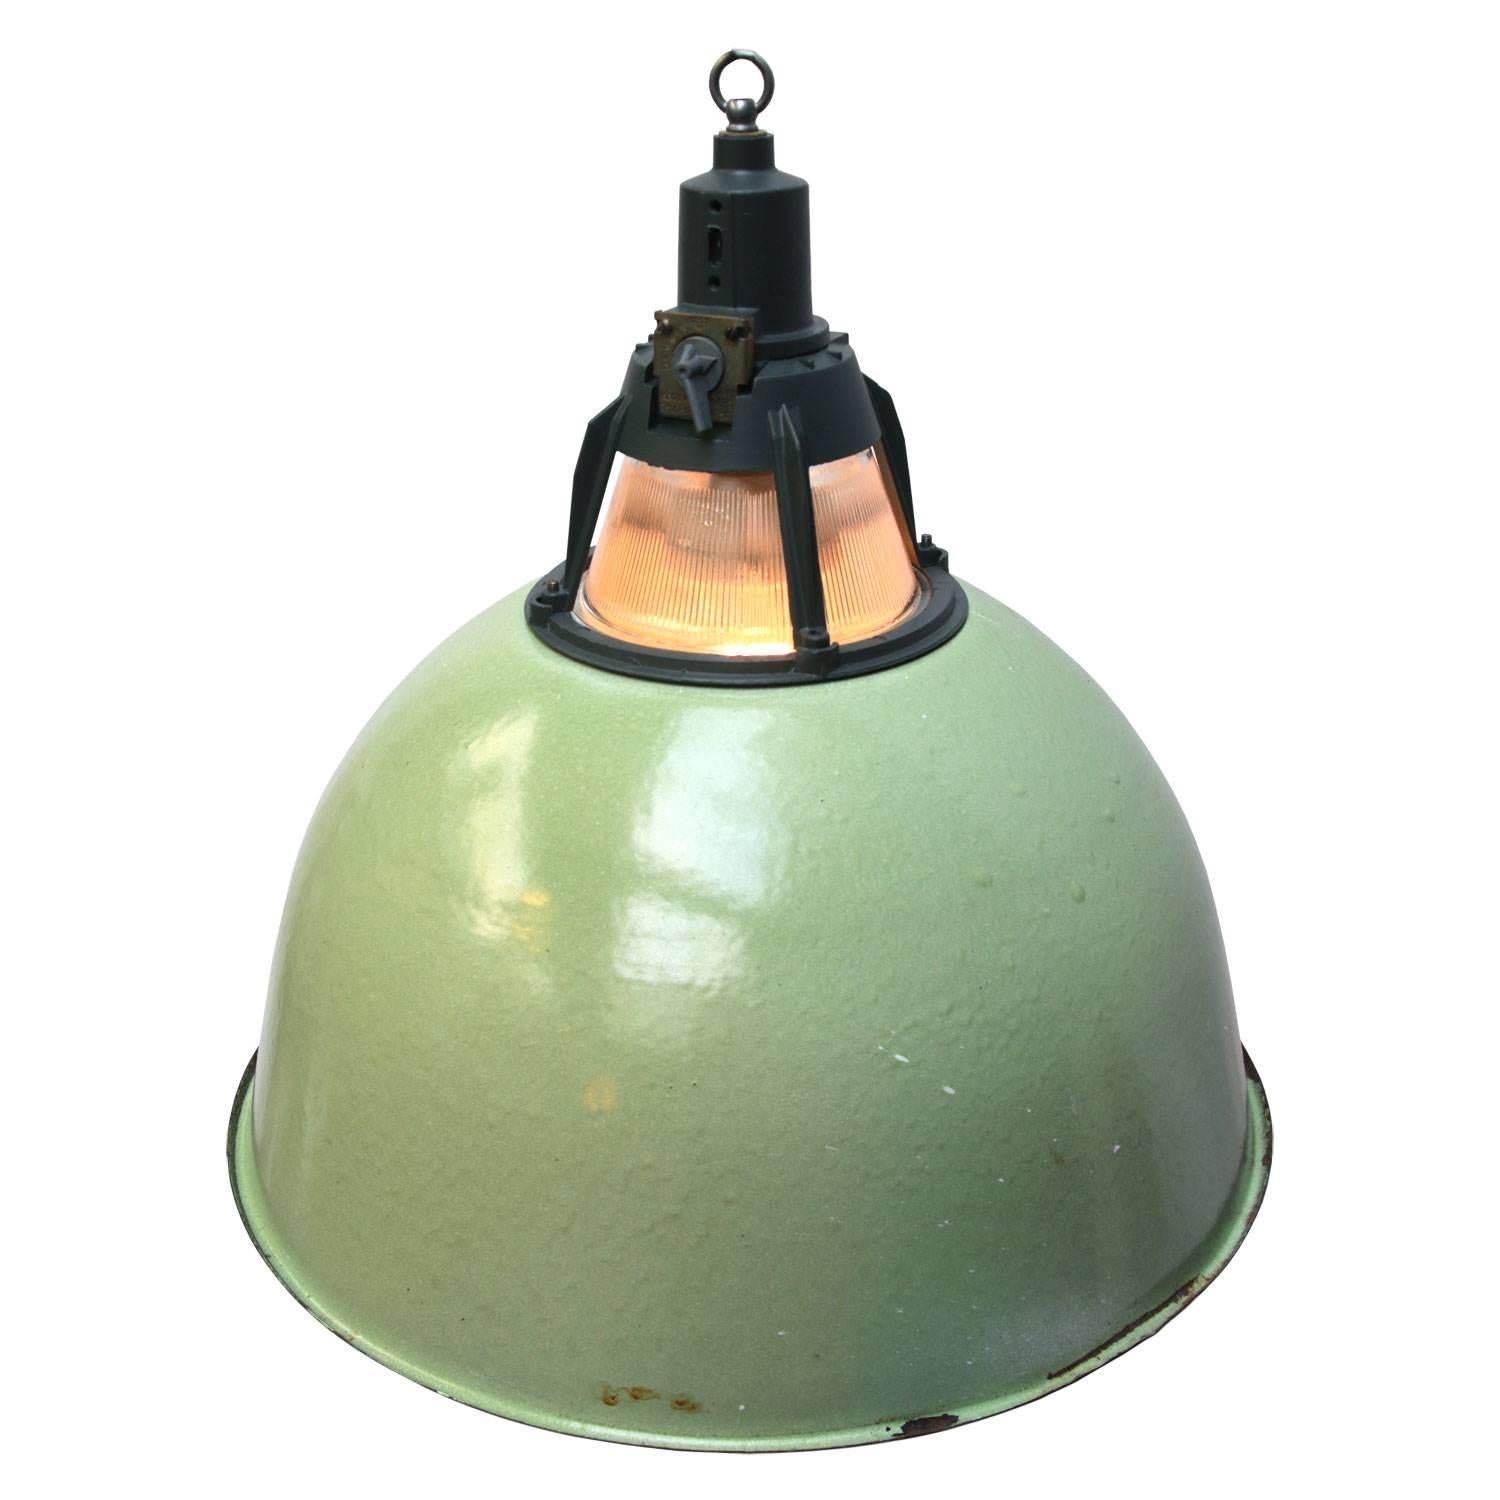 Enamel Industrial pendant. Light green enamel shade.
White inside. Dark grey cast aluminium top.

Weight: 5.0 kg / 11 lb

All lamps have been made suitable by international standards for incandescent light bulbs, energy-efficient and LED bulbs.